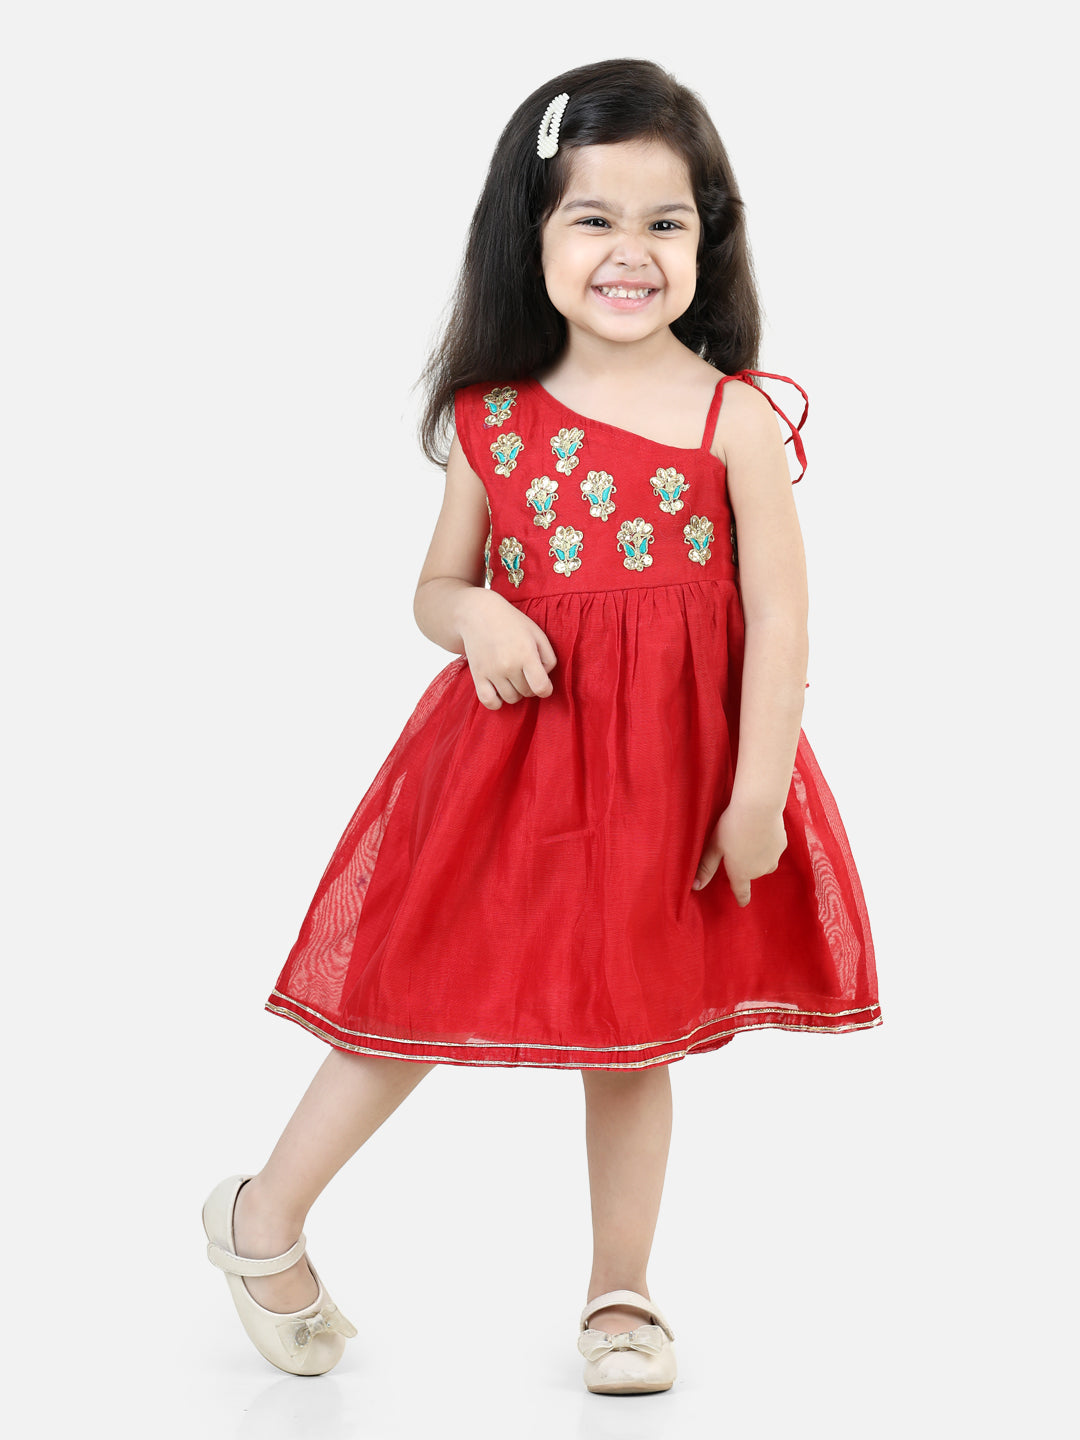 BownBee Girls Gota Patti Embroidery Chanderi Frock Party Dress - Red